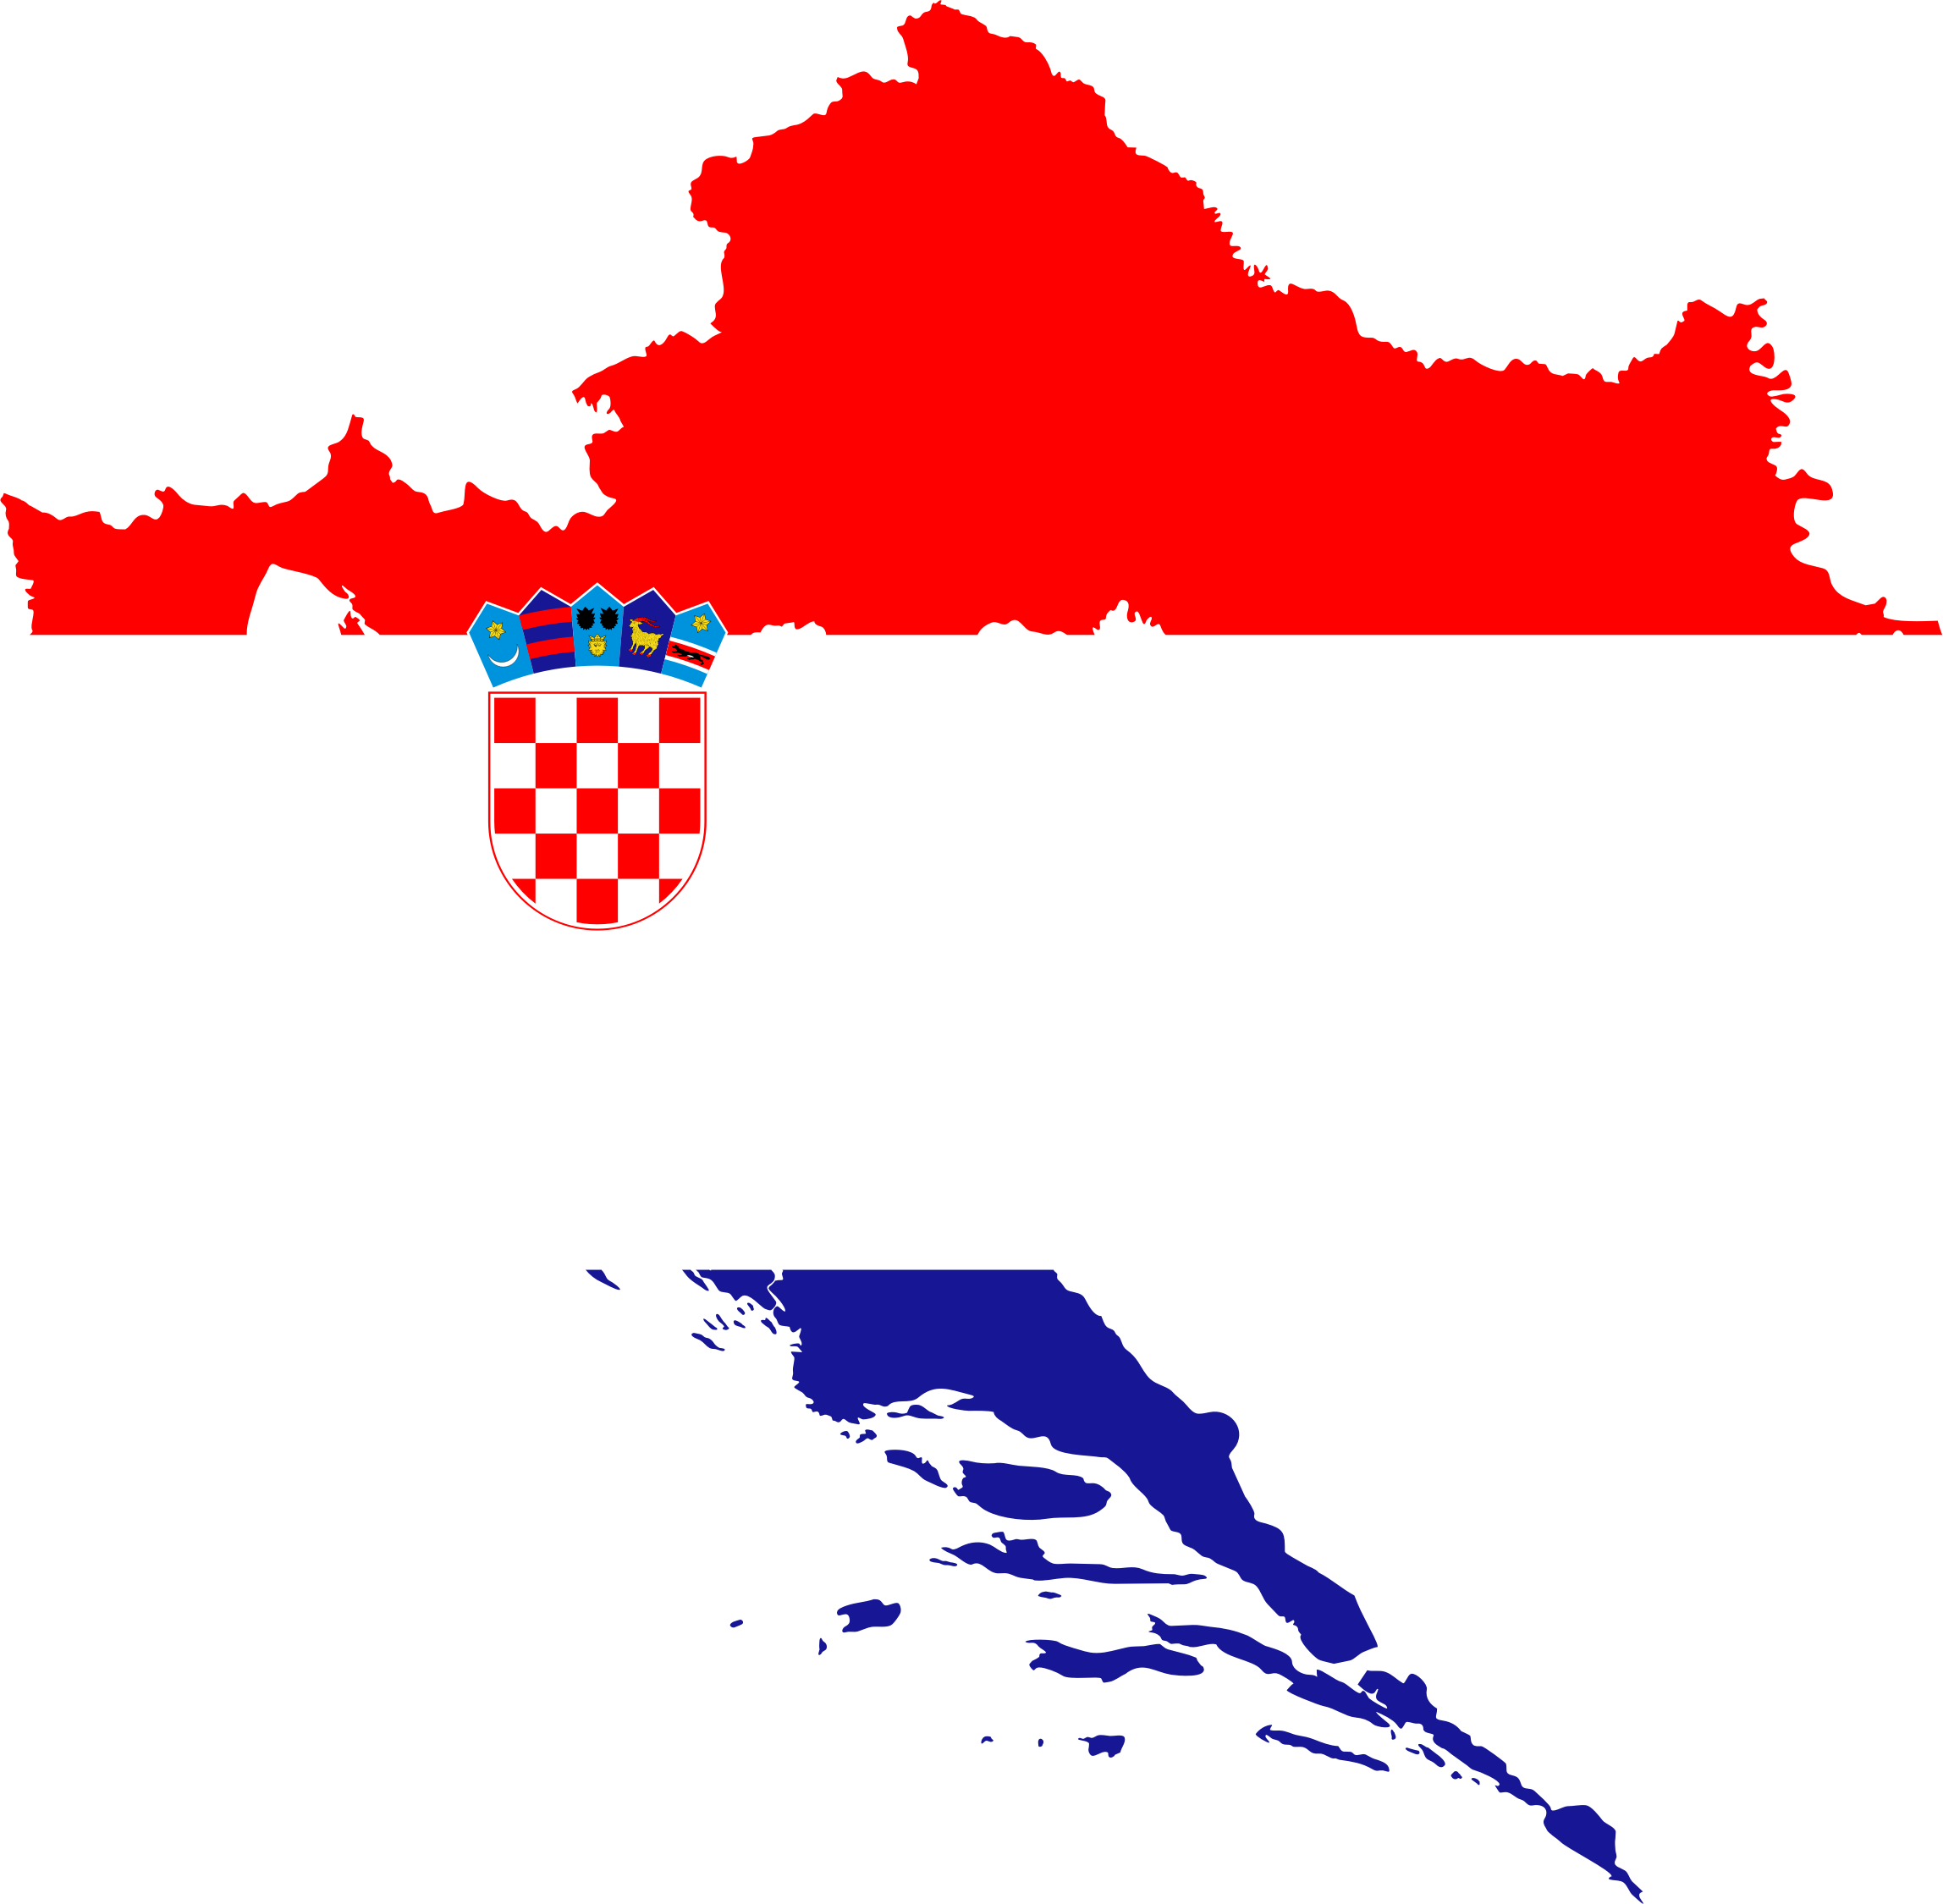 A Map Of Croatia With A Red White And Blue Flag